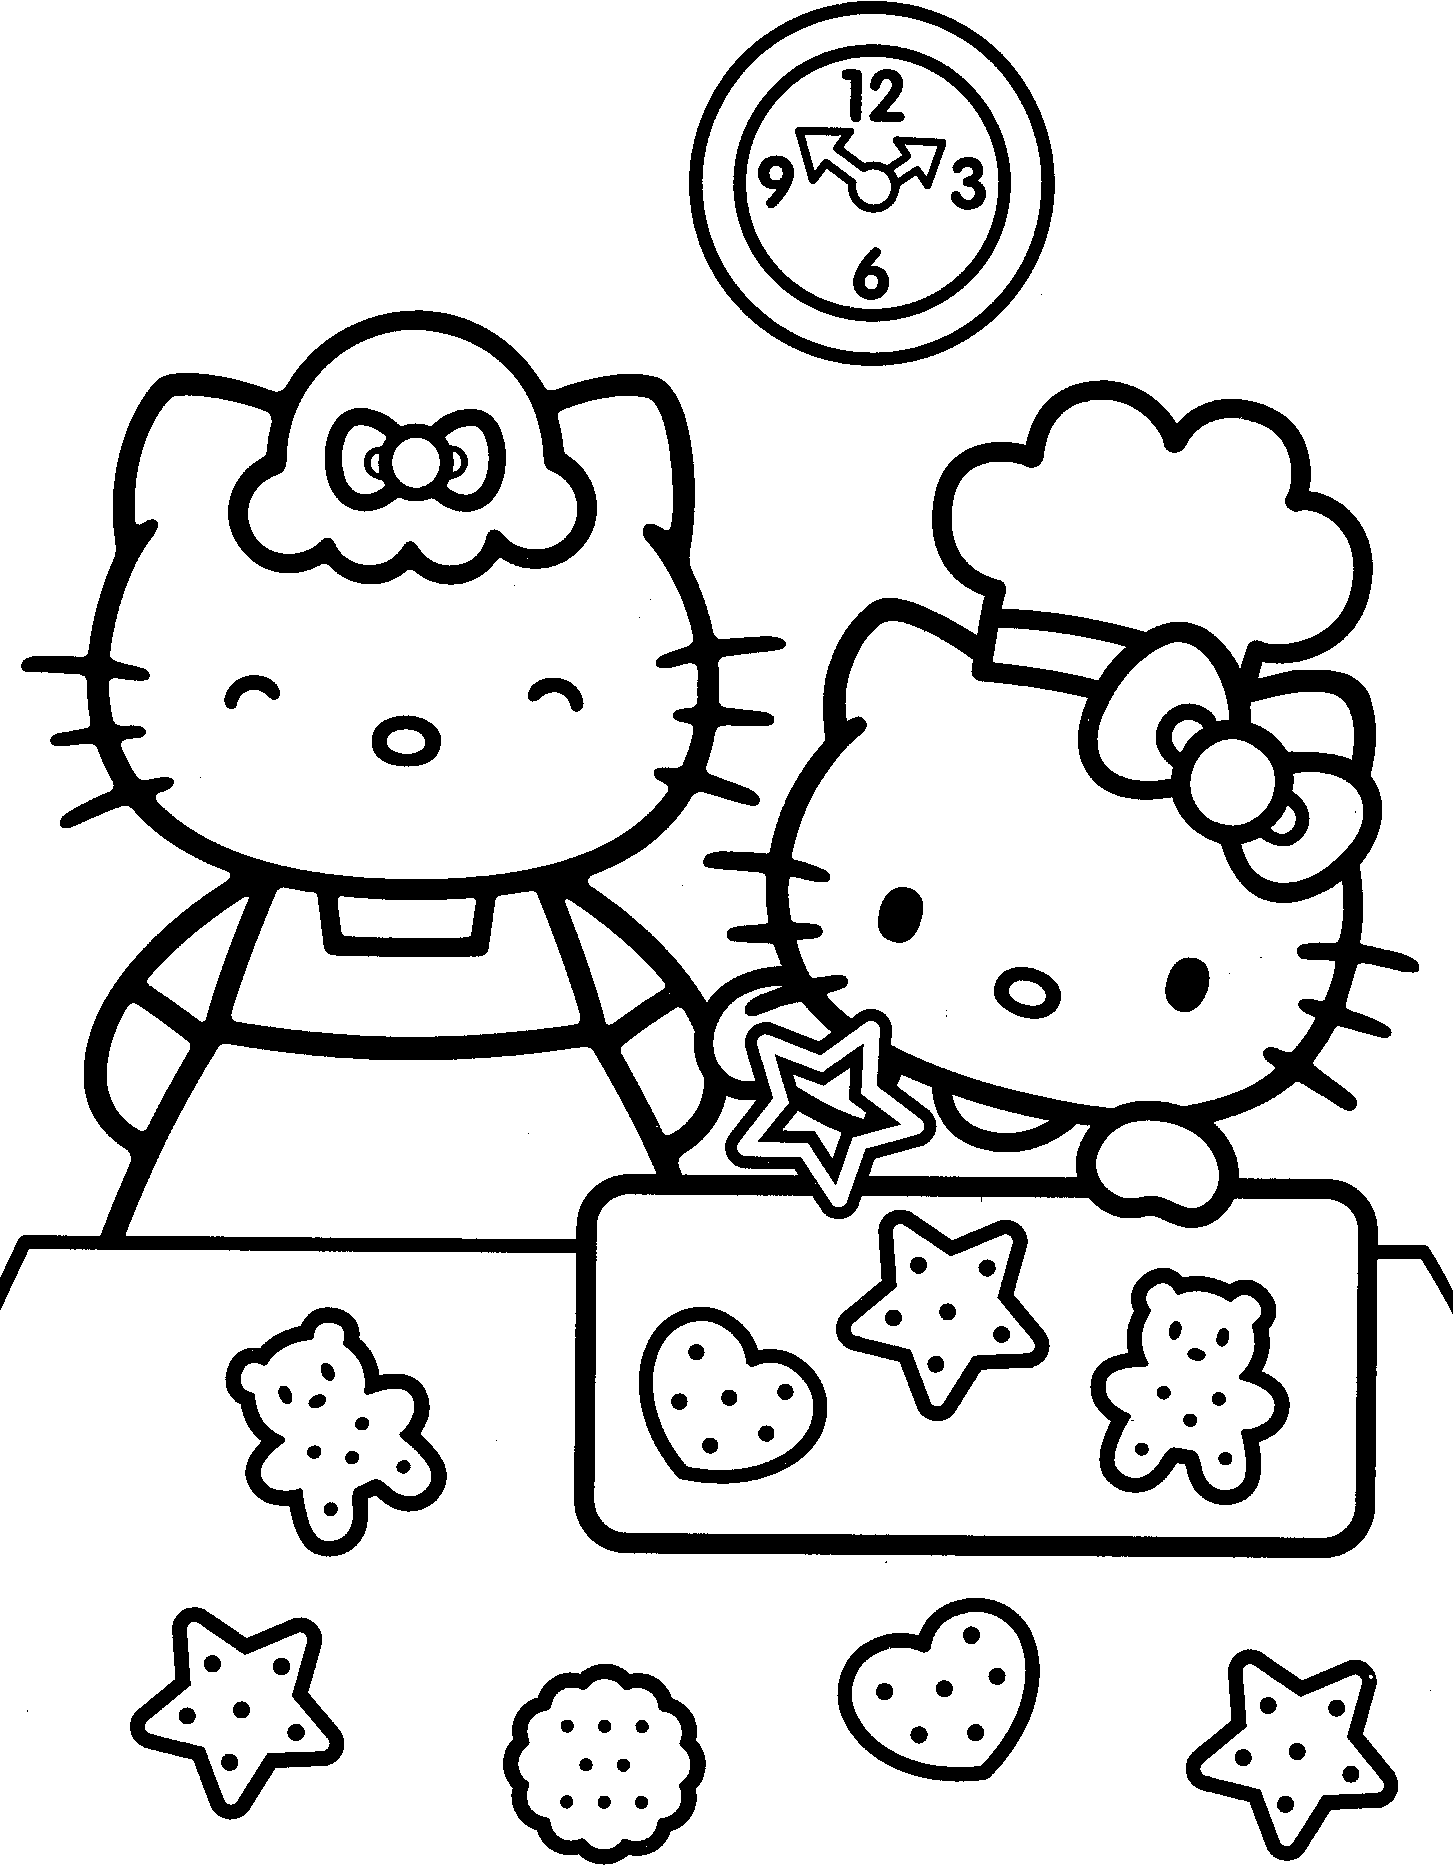 Peas clipart colouring page. Hello kitty coloring party